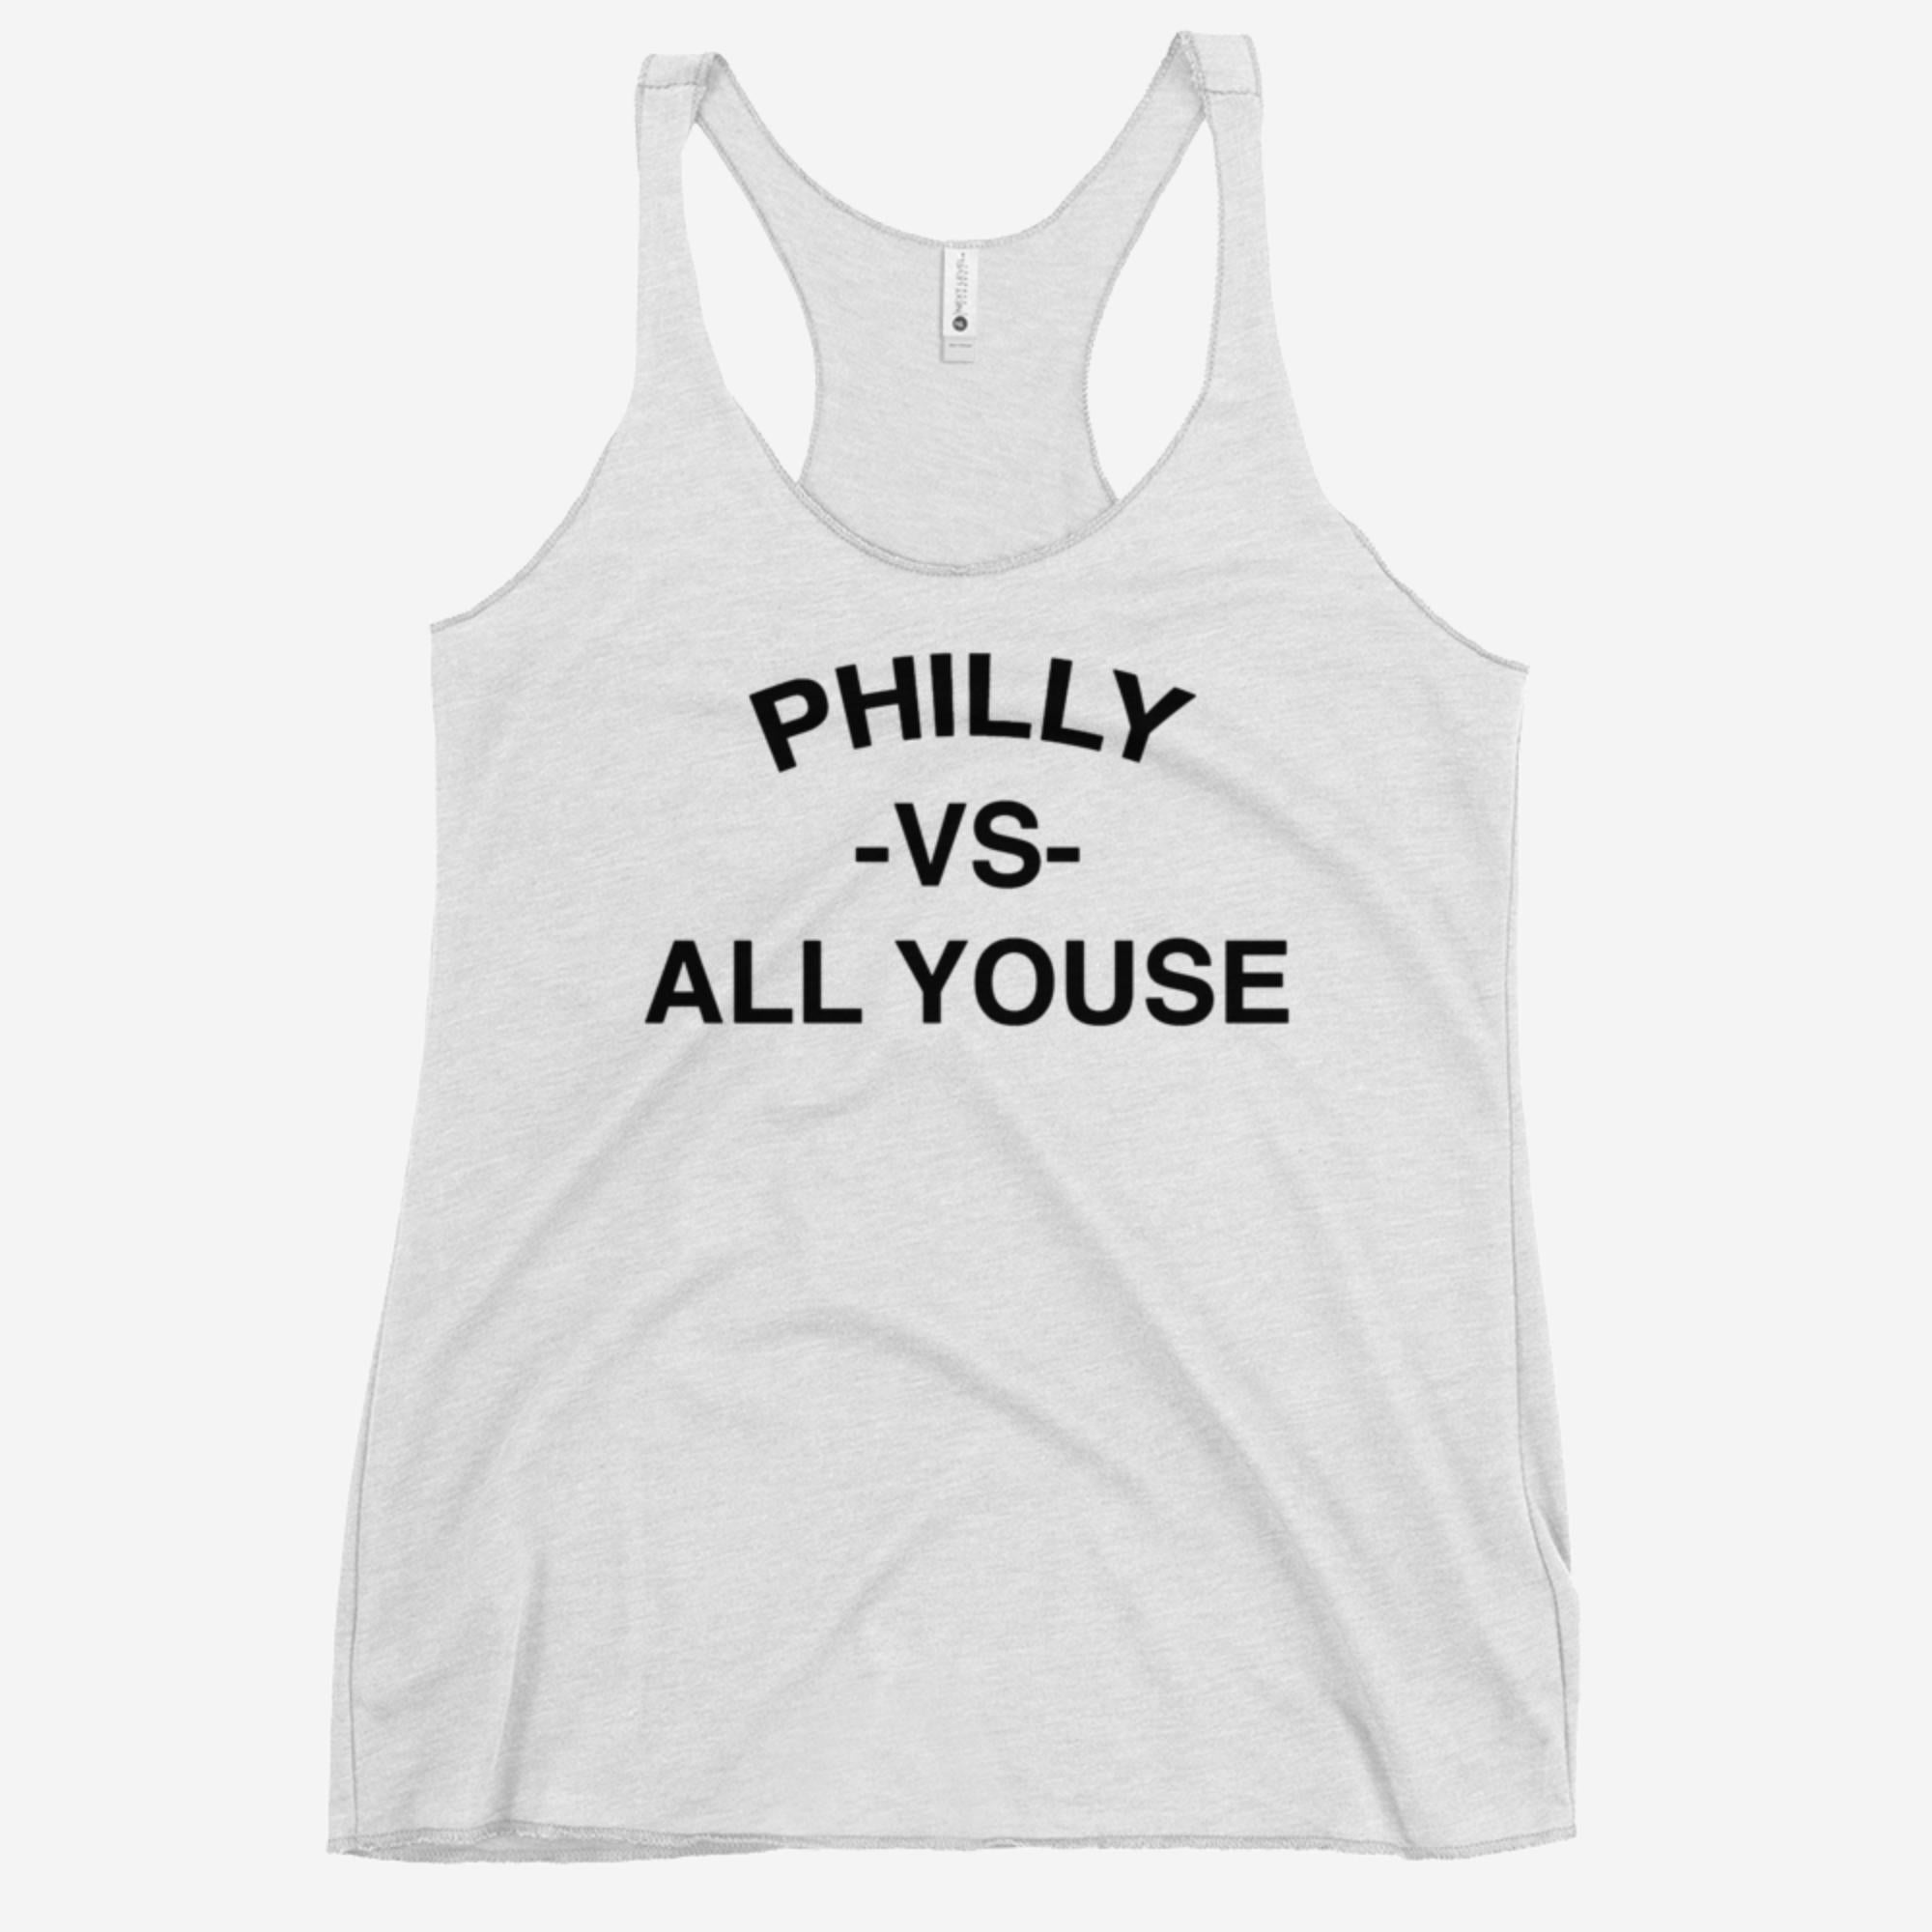 "Philly vs All Youse" Women's Tank Top